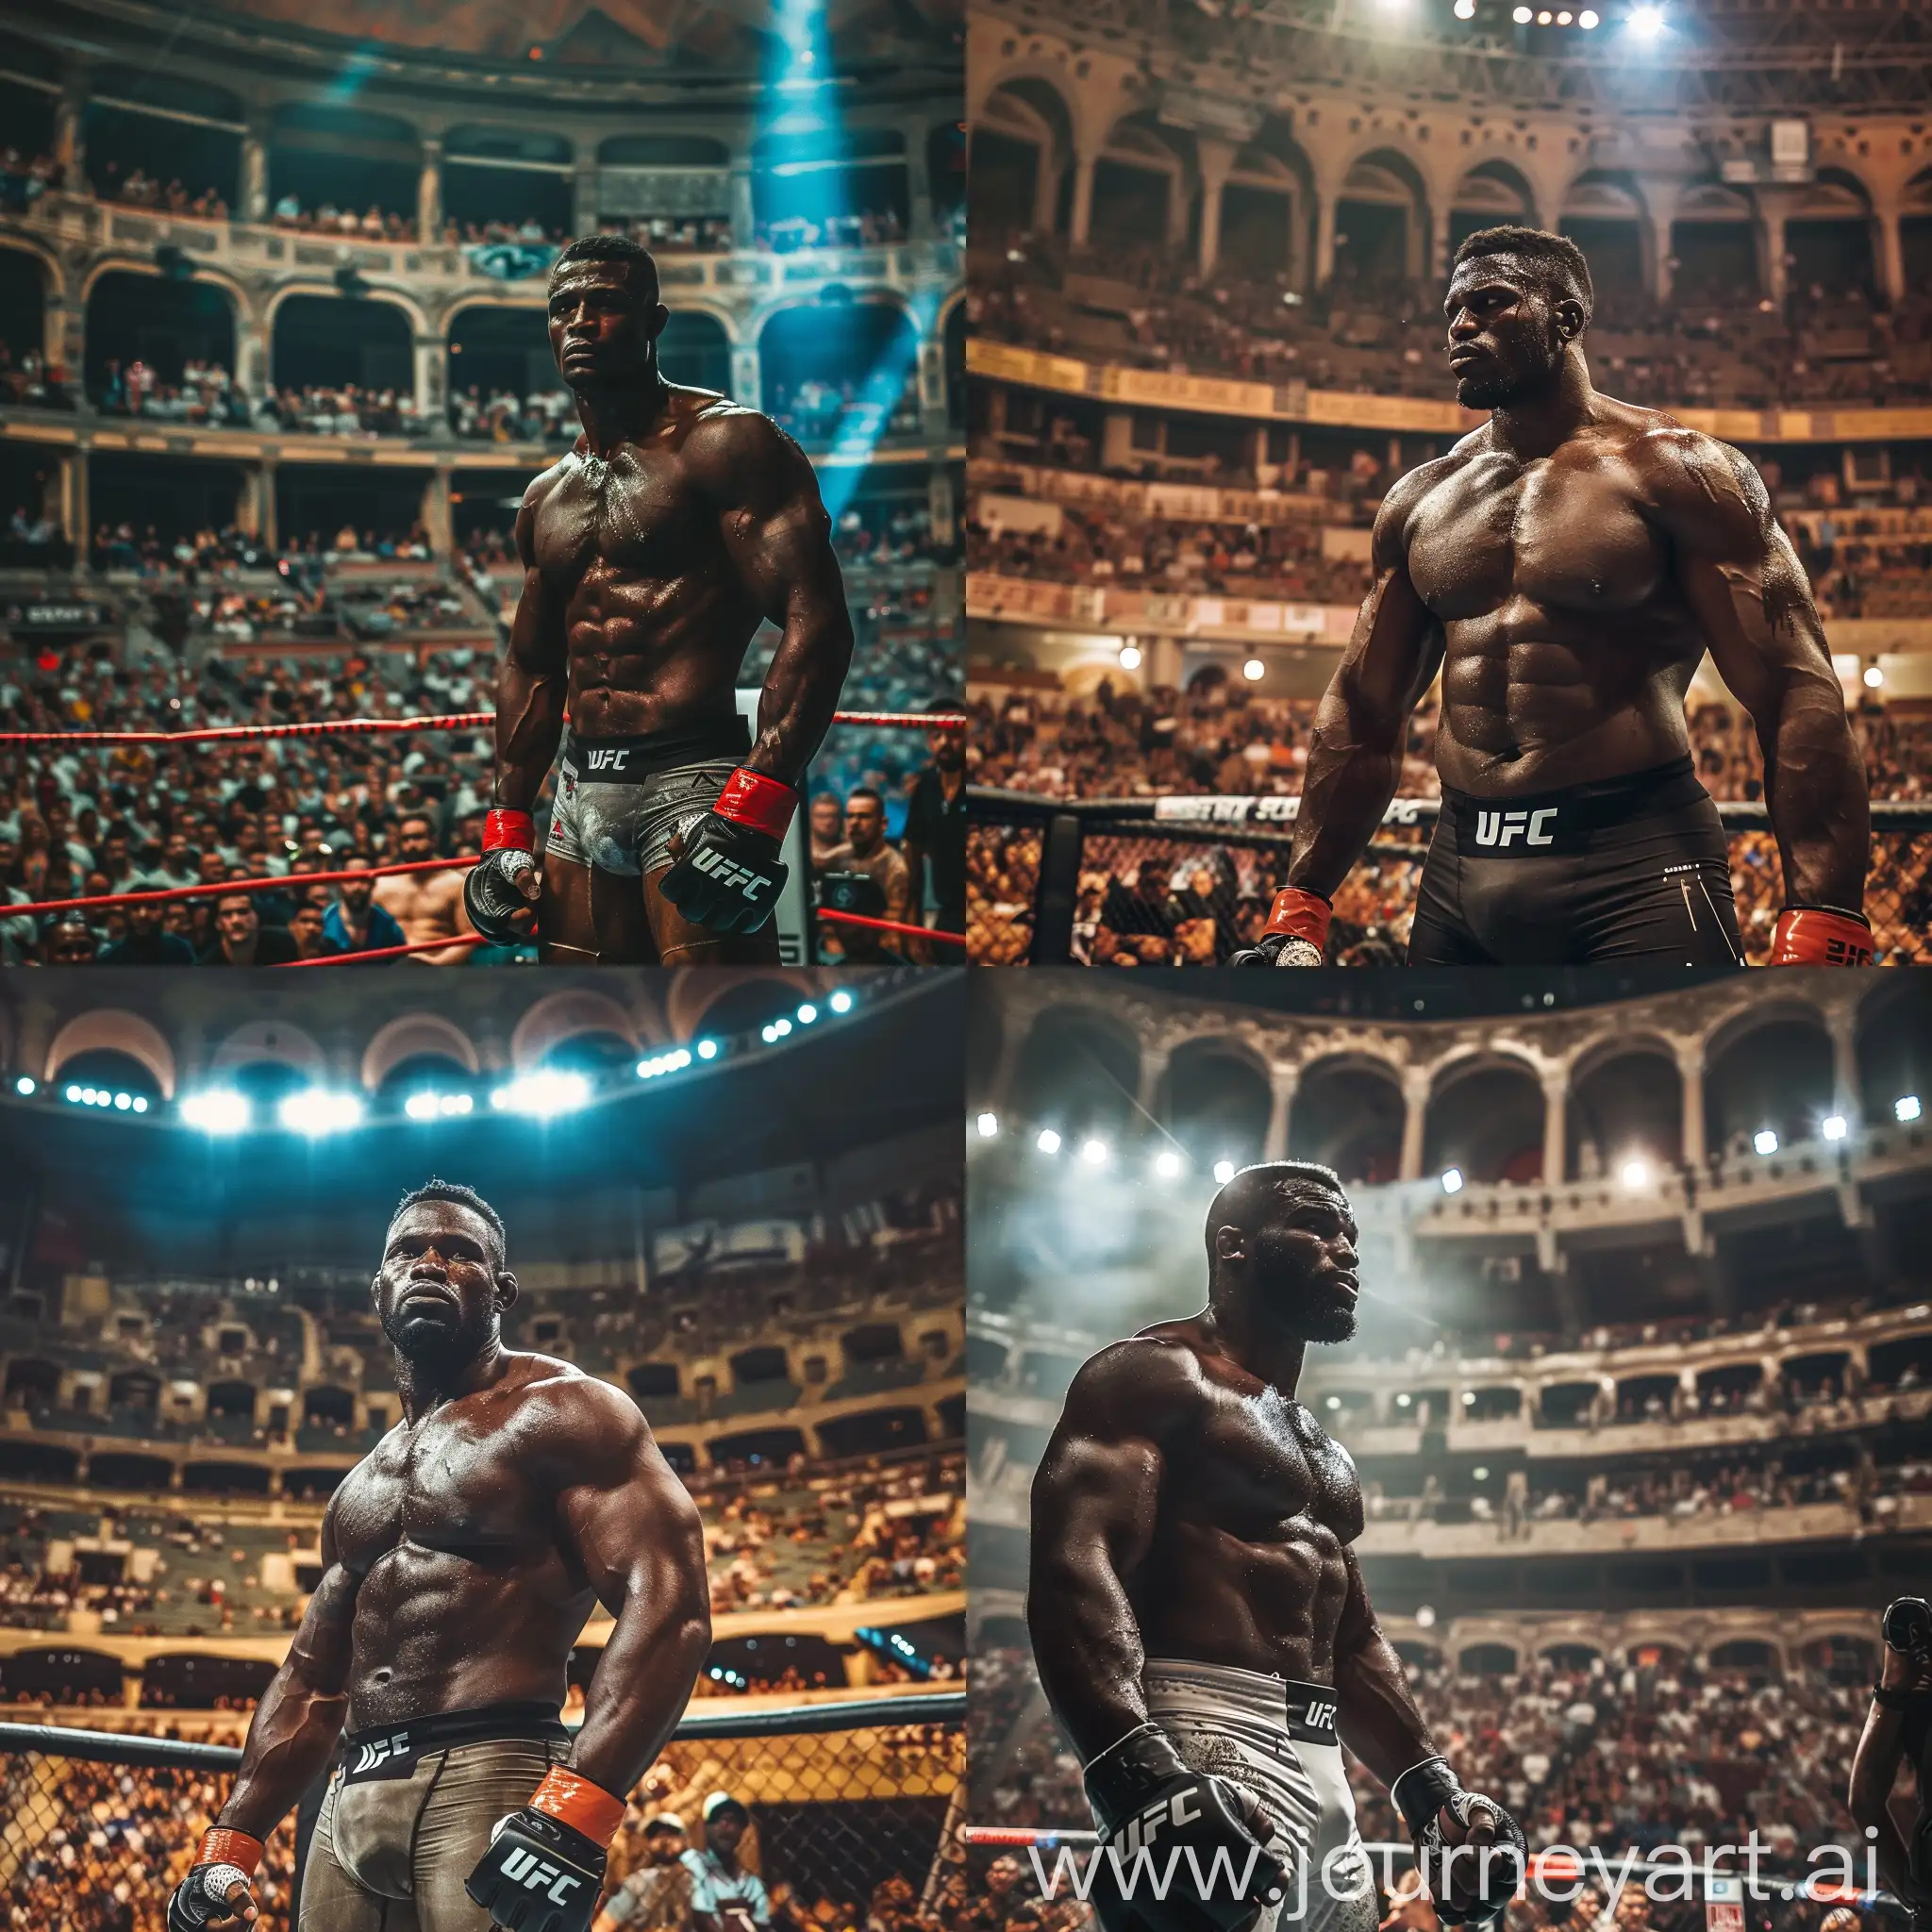 Tall, aesthetic black man, mma fighter, inside a mma ring inside a colloseum with many spectators